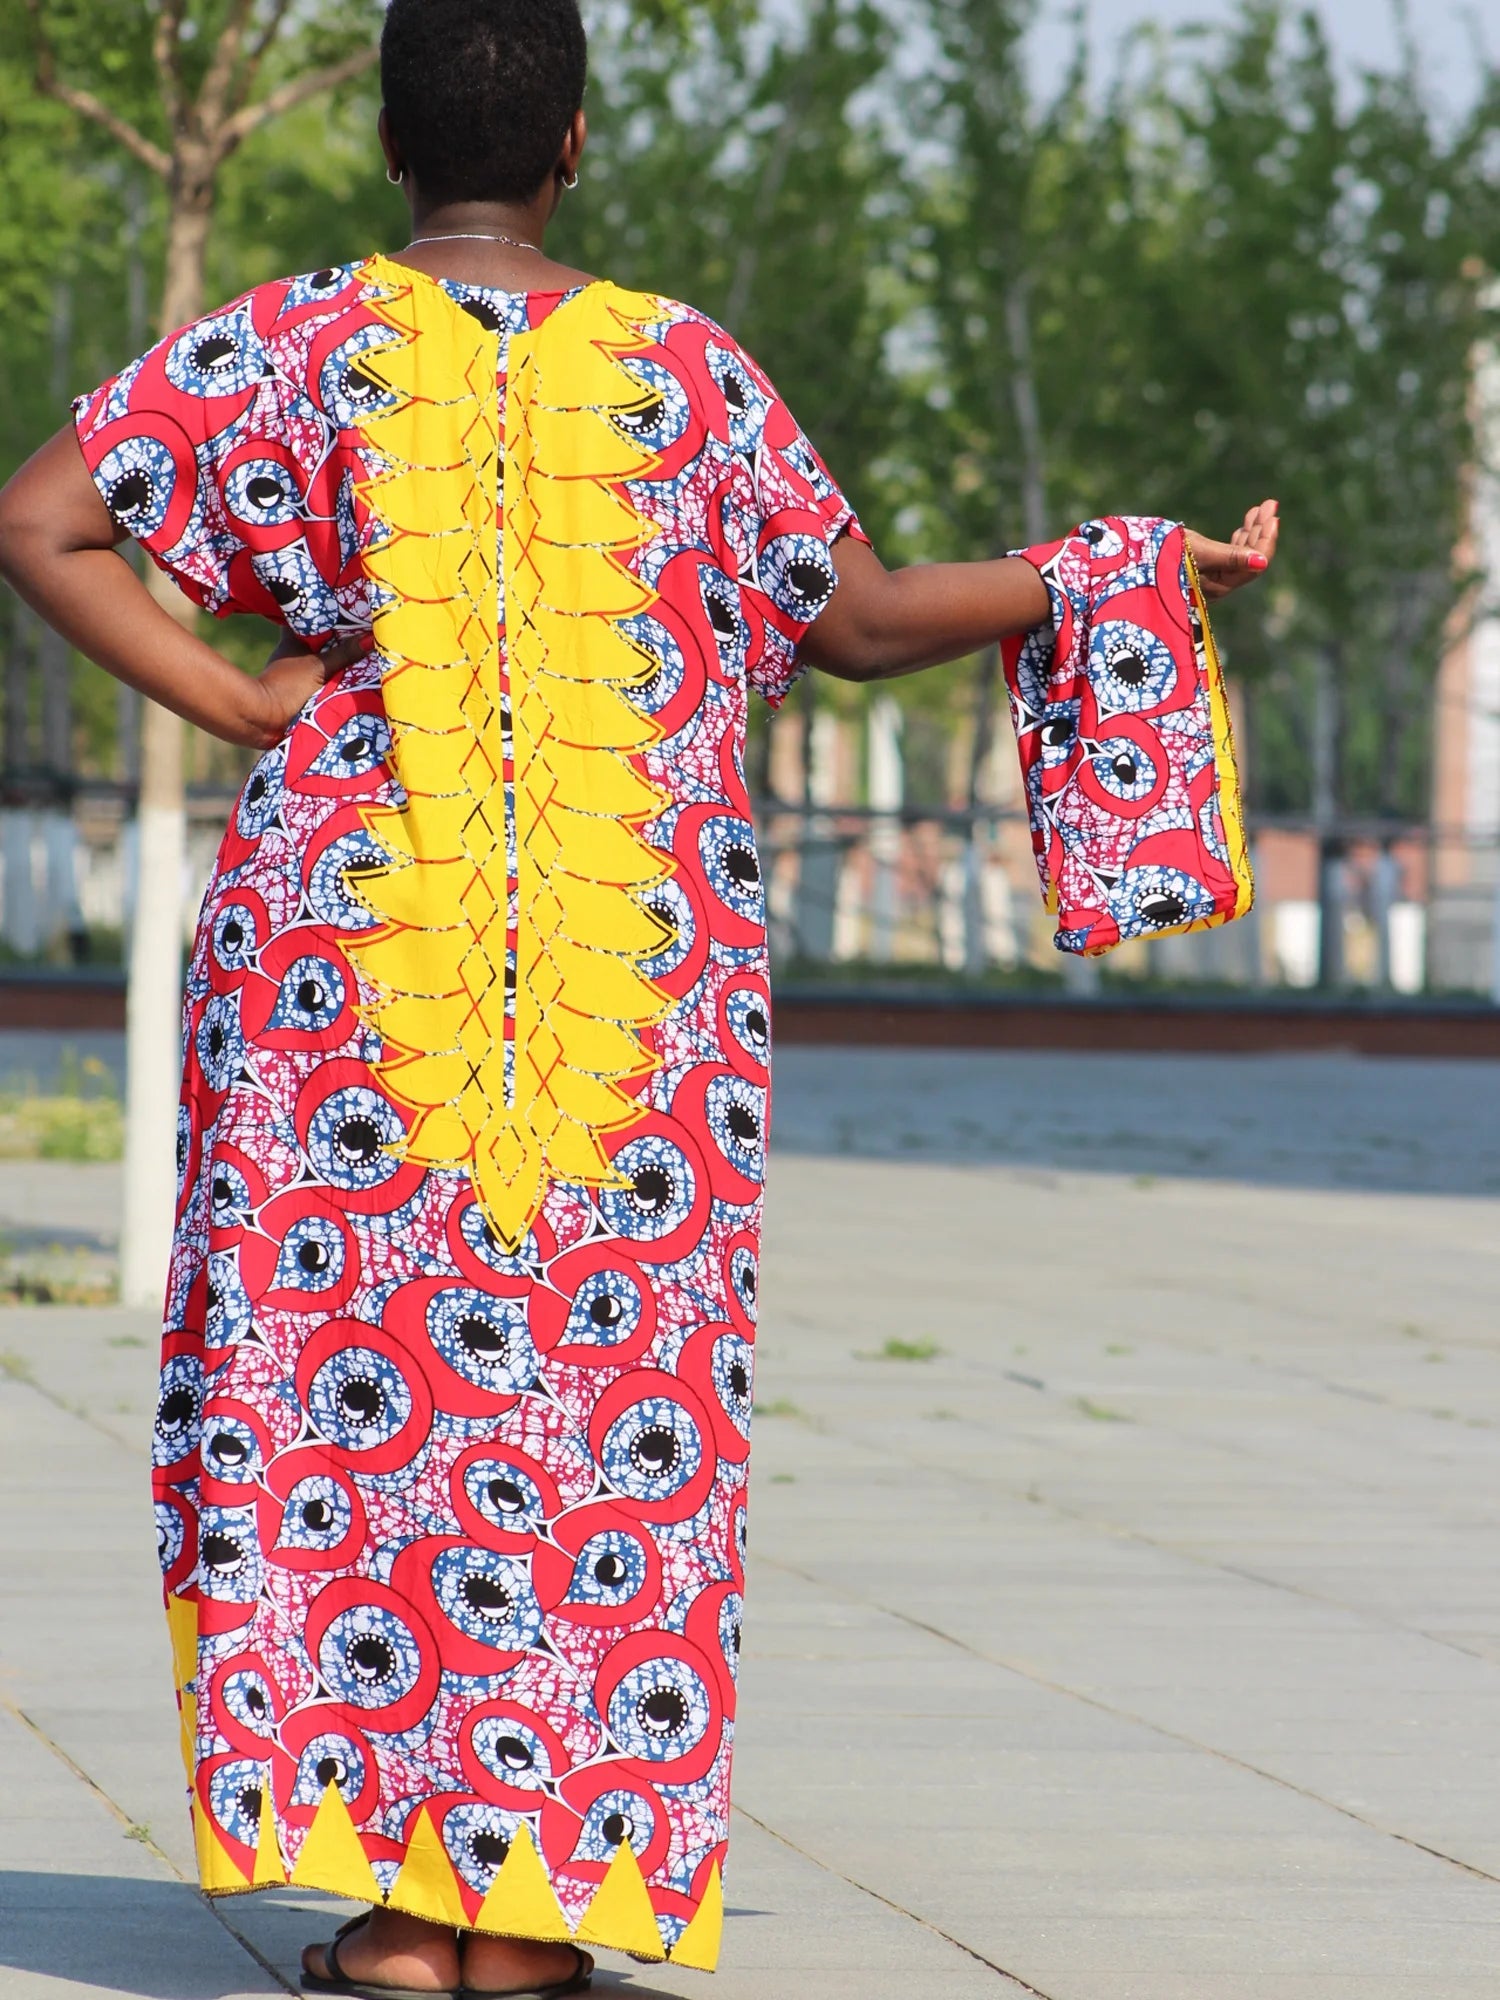 Timeless African Inspired Long Summer Dress: Casual Cotton Fashion for Elegant Holiday Beachwear - Flexi Africa - Flexi Africa offers Free Delivery Worldwide - Vibrant African traditional clothing showcasing bold prints and intricate designs